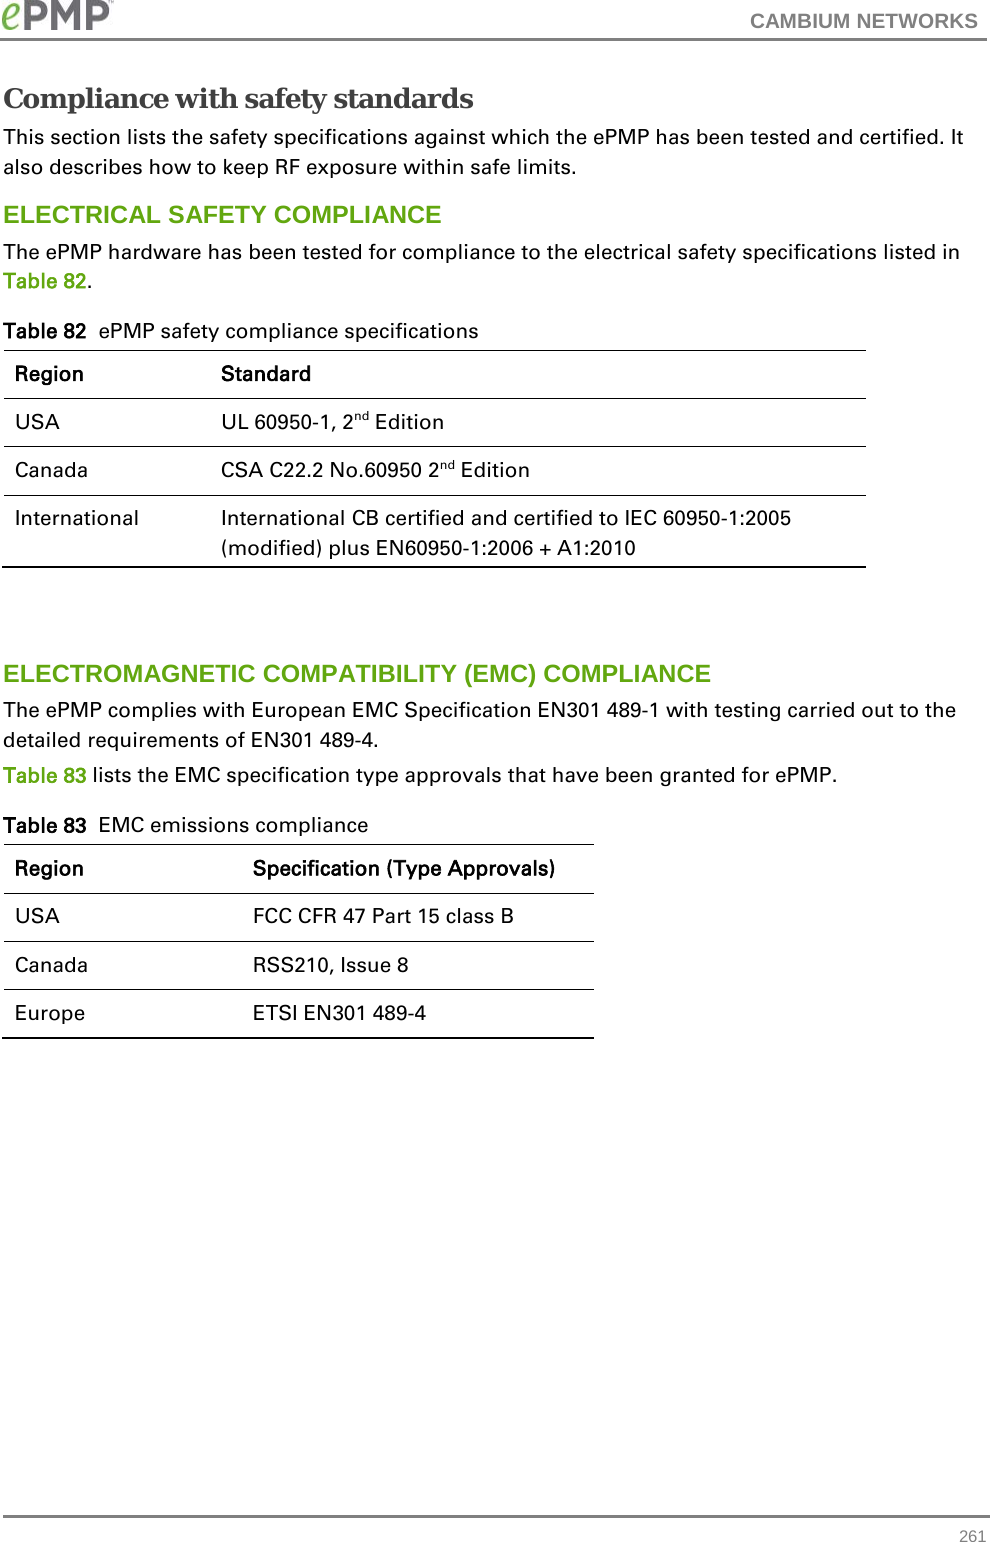 CAMBIUM NETWORKS  Compliance with safety standards This section lists the safety specifications against which the ePMP has been tested and certified. It also describes how to keep RF exposure within safe limits. ELECTRICAL SAFETY COMPLIANCE  The ePMP hardware has been tested for compliance to the electrical safety specifications listed in Table 82. Table 82  ePMP safety compliance specifications Region Standard USA UL 60950-1, 2nd Edition Canada CSA C22.2 No.60950 2nd Edition International International CB certified and certified to IEC 60950-1:2005 (modified) plus EN60950-1:2006 + A1:2010   ELECTROMAGNETIC COMPATIBILITY (EMC) COMPLIANCE The ePMP complies with European EMC Specification EN301 489-1 with testing carried out to the detailed requirements of EN301 489-4.  Table 83 lists the EMC specification type approvals that have been granted for ePMP. Table 83  EMC emissions compliance Region Specification (Type Approvals) USA FCC CFR 47 Part 15 class B Canada RSS210, Issue 8 Europe ETSI EN301 489-4   261 